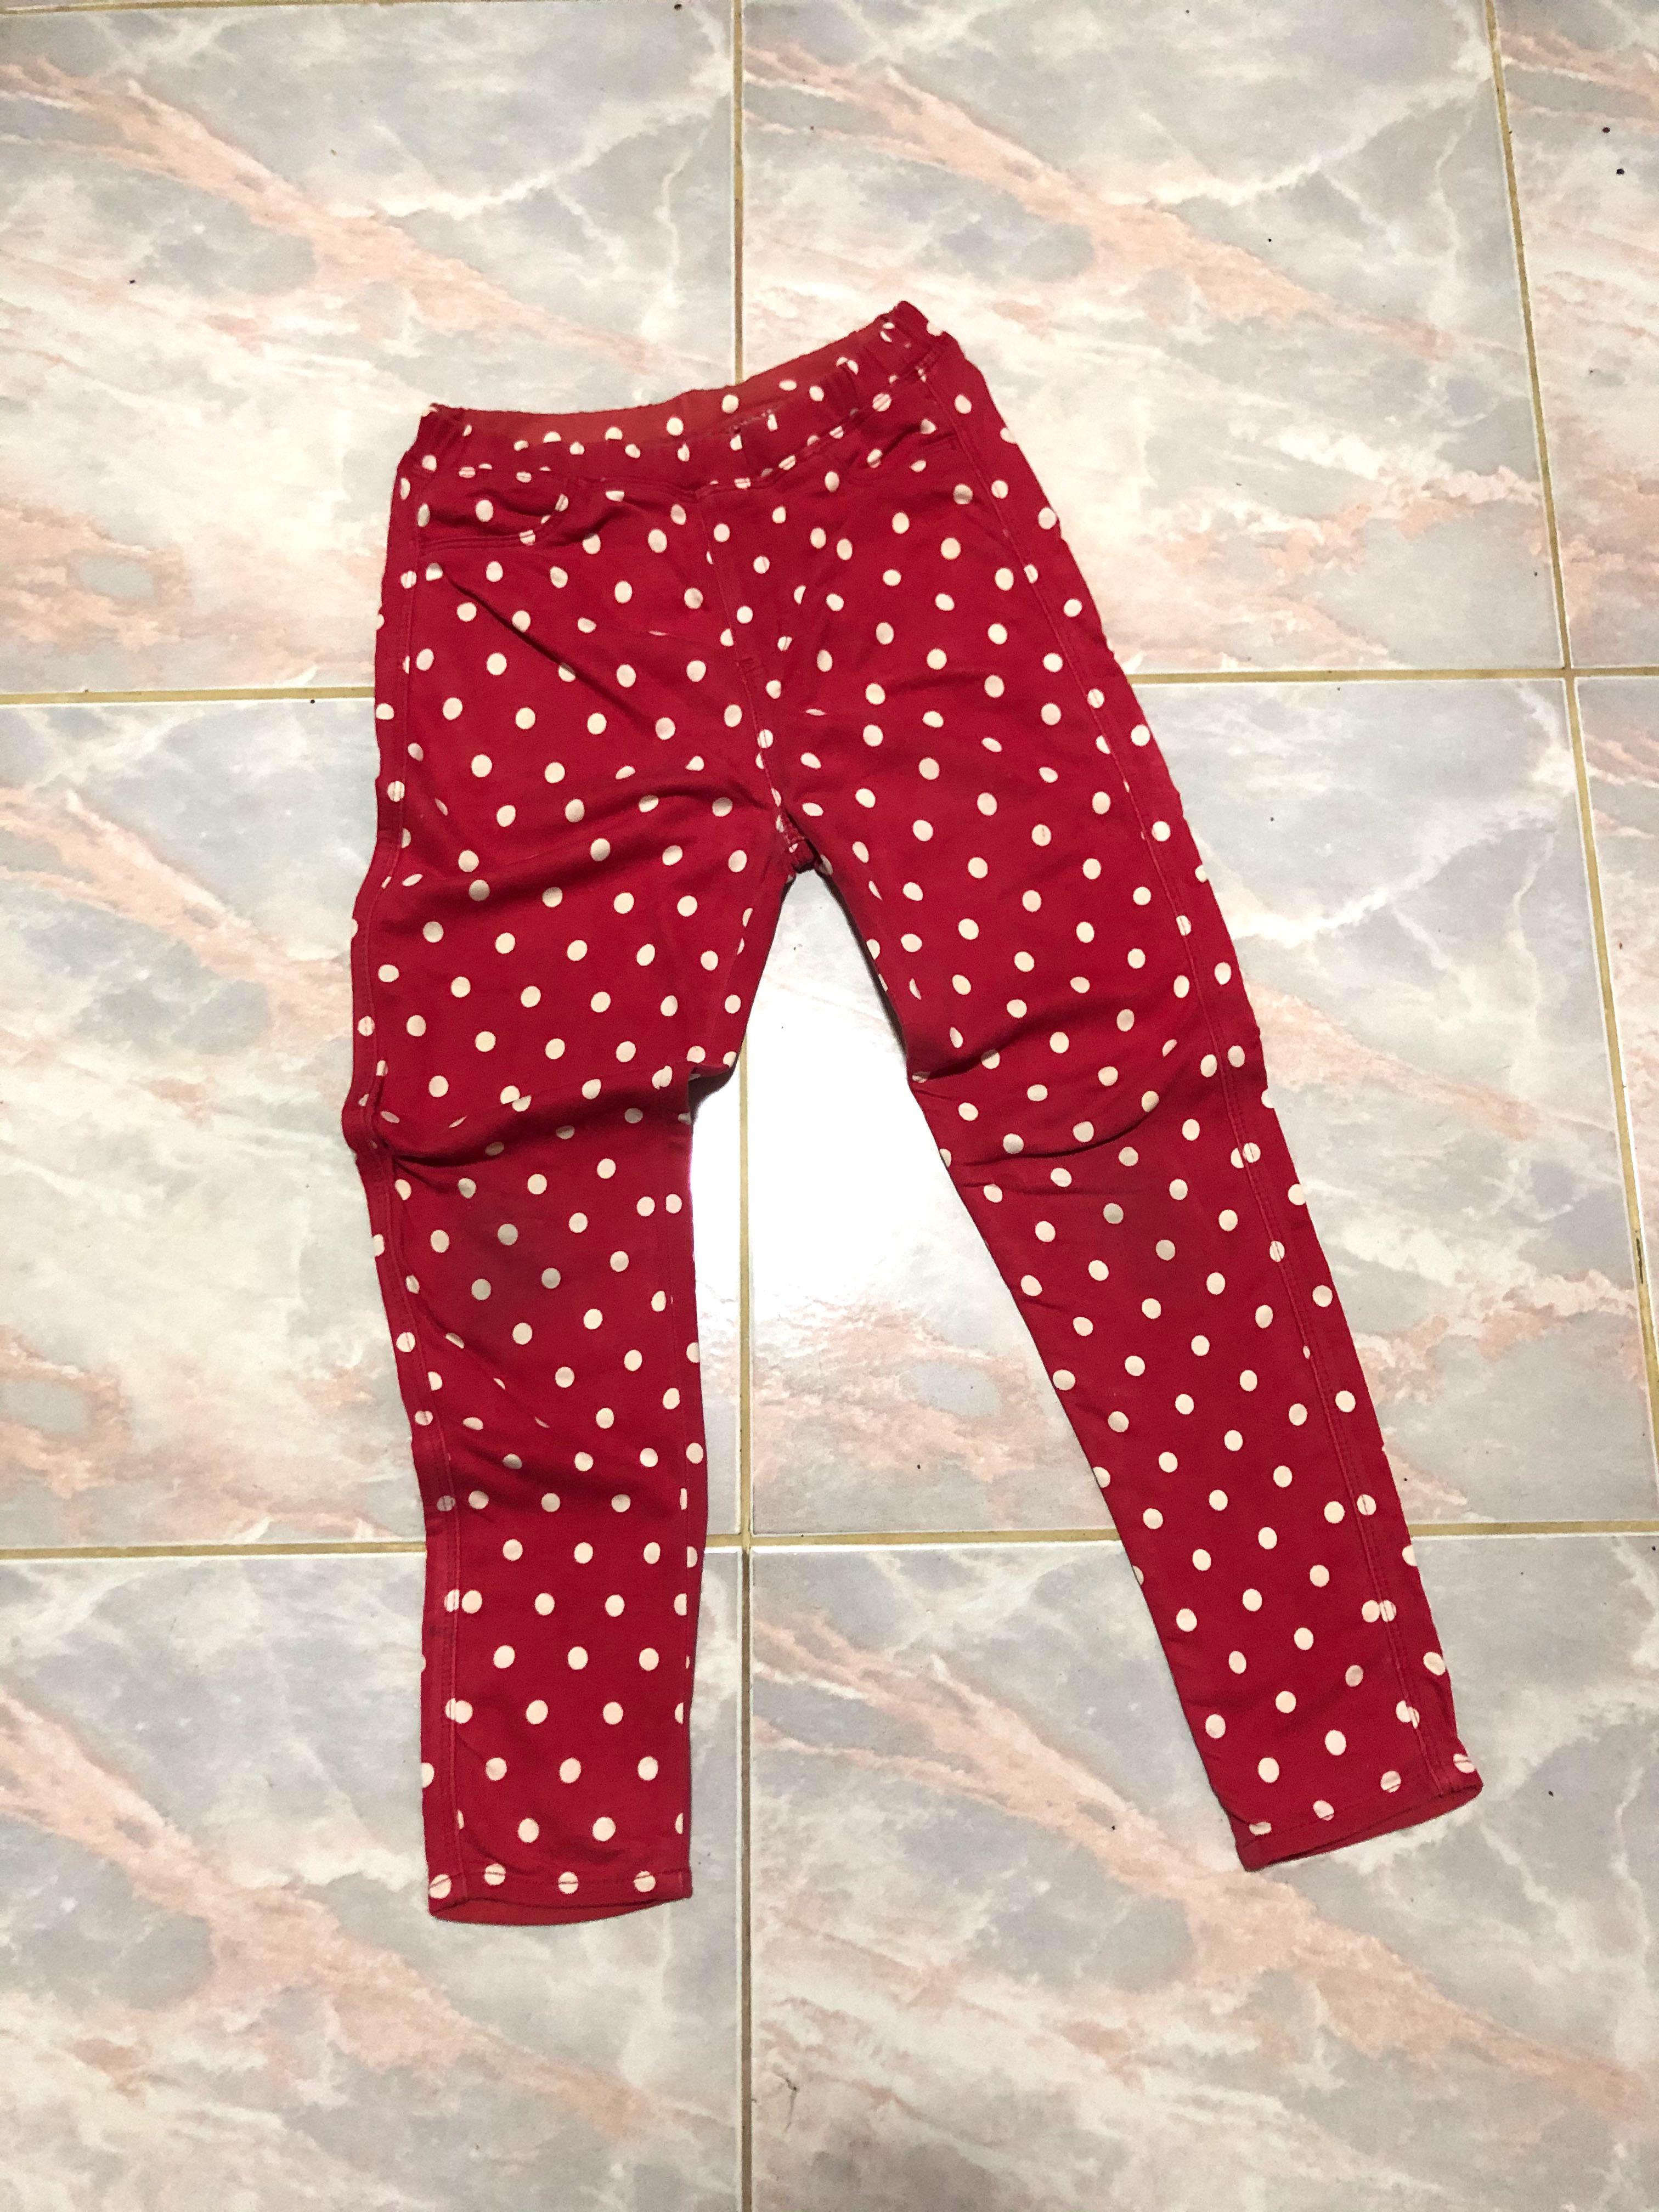 girls red jeans